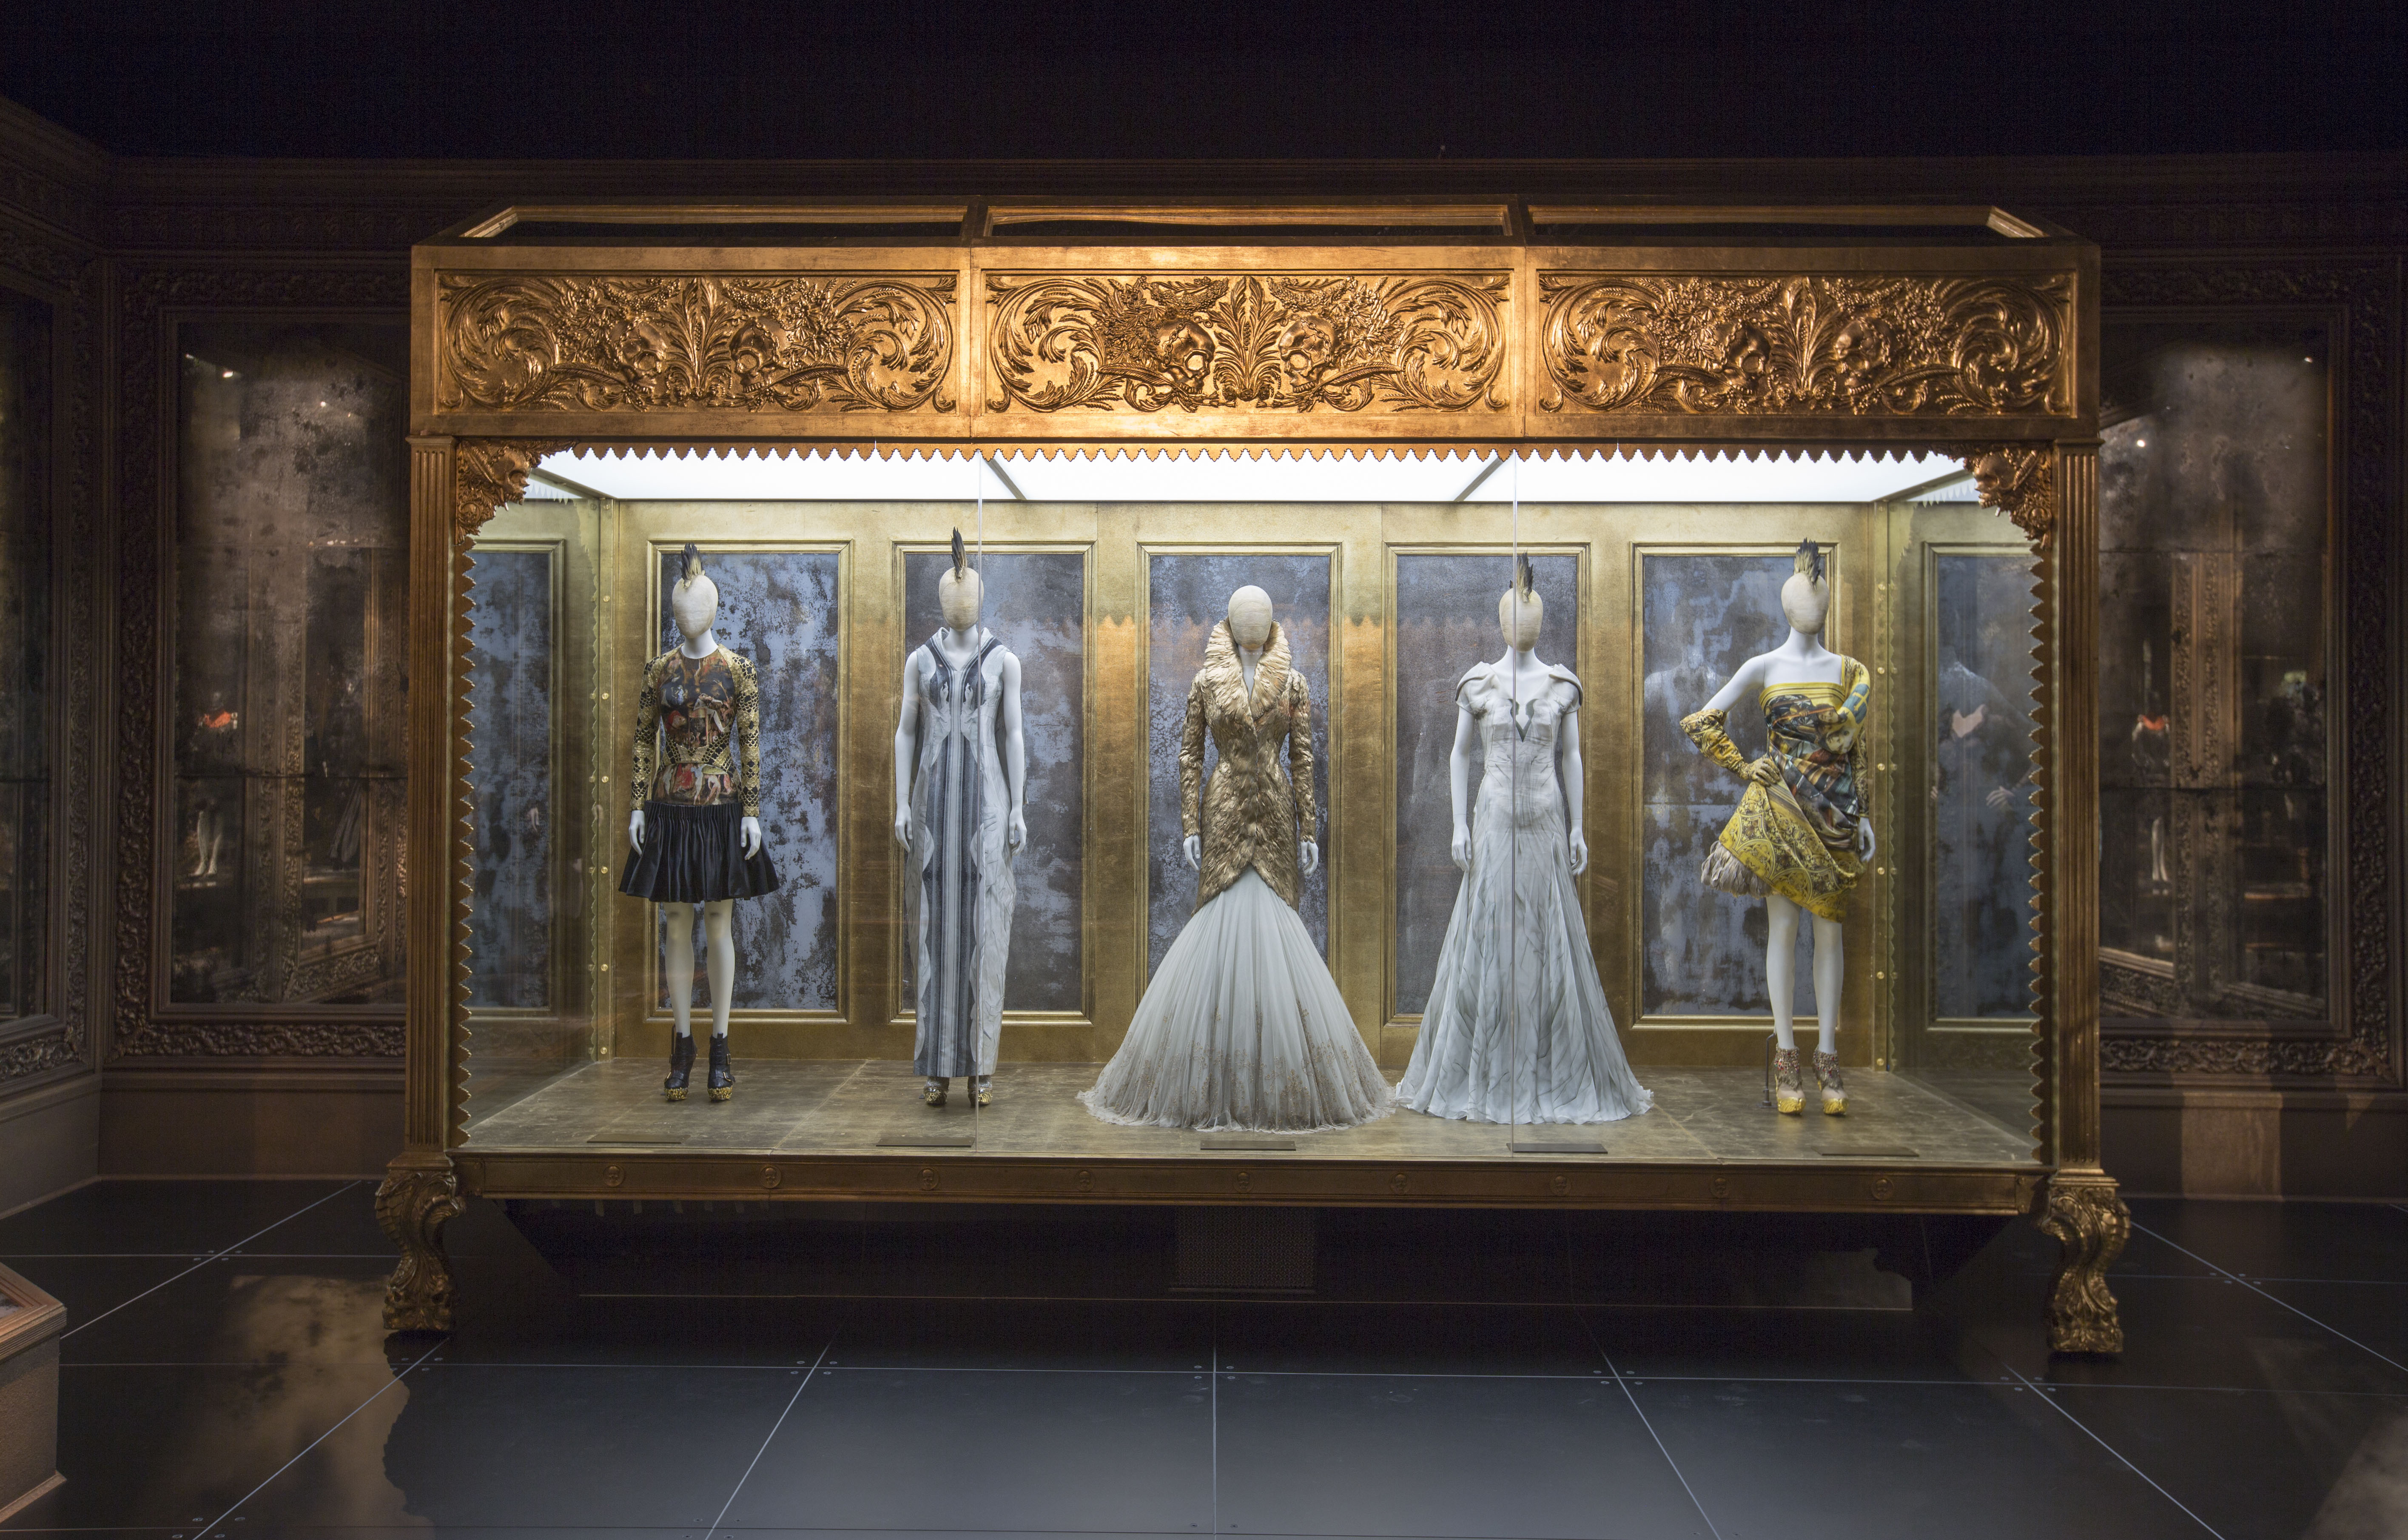 3. Installation view of 'Romantic Gothic' gallery, Alexander McQueen Savage Beauty at the V&A (c) Victoria and Albert Museum London